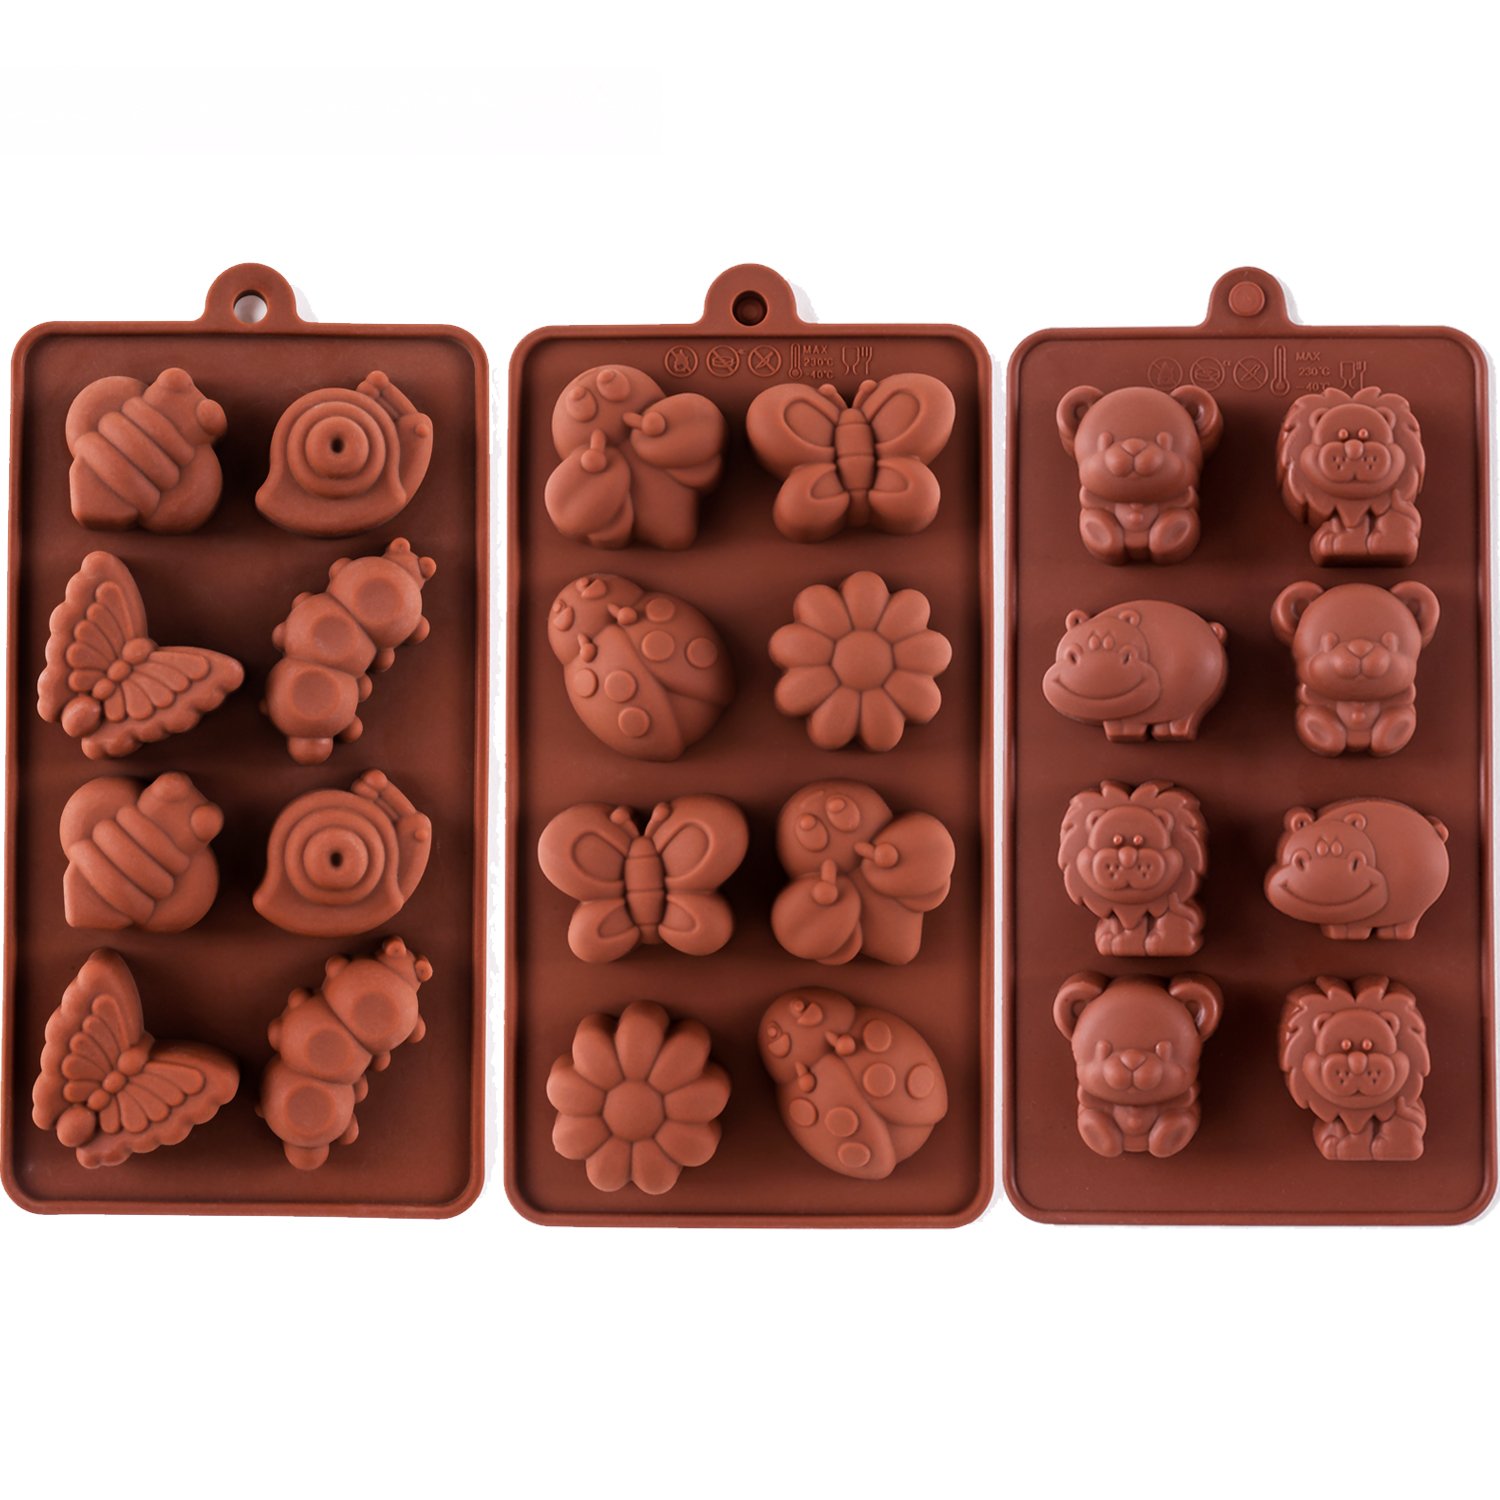 STARUBY Silicone Molds Non-stick Chocolate Candy Mold,Soap Molds